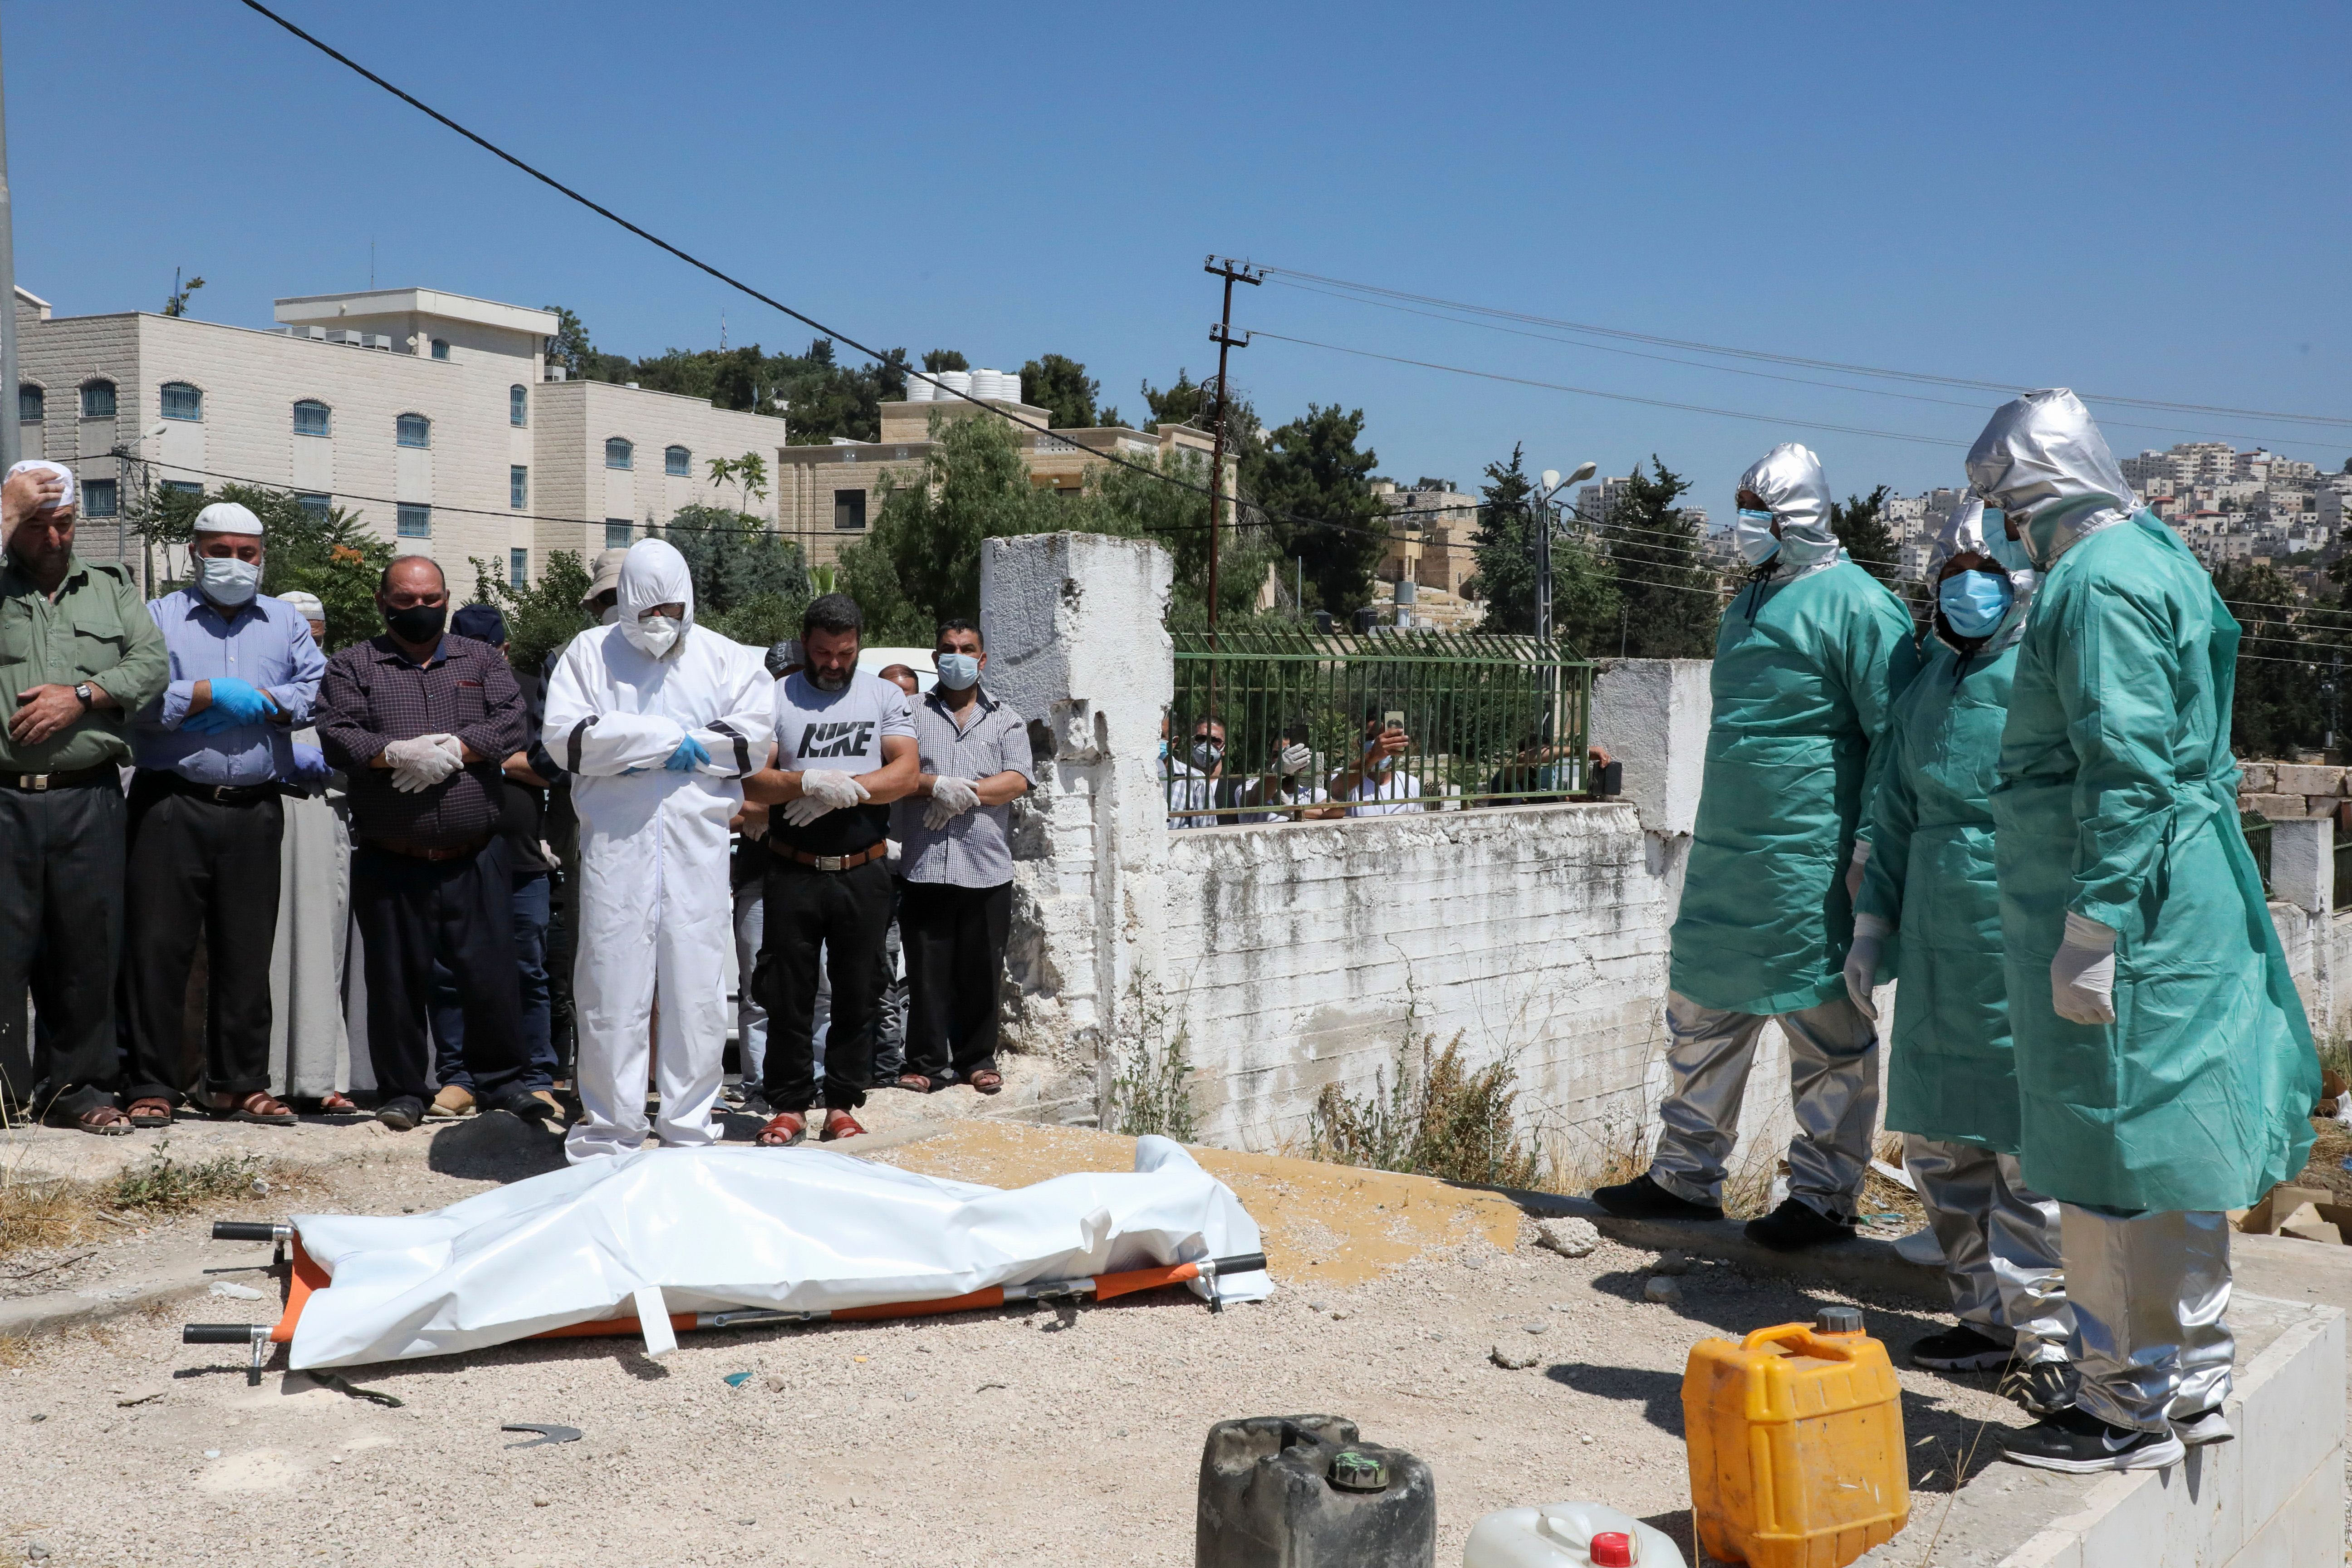 Relatives and staff from the Palestinian Ministry of Health stand by the body of a person said to have died from Covid-19 before burial in the southern West Bank city of Hebron on June 29.